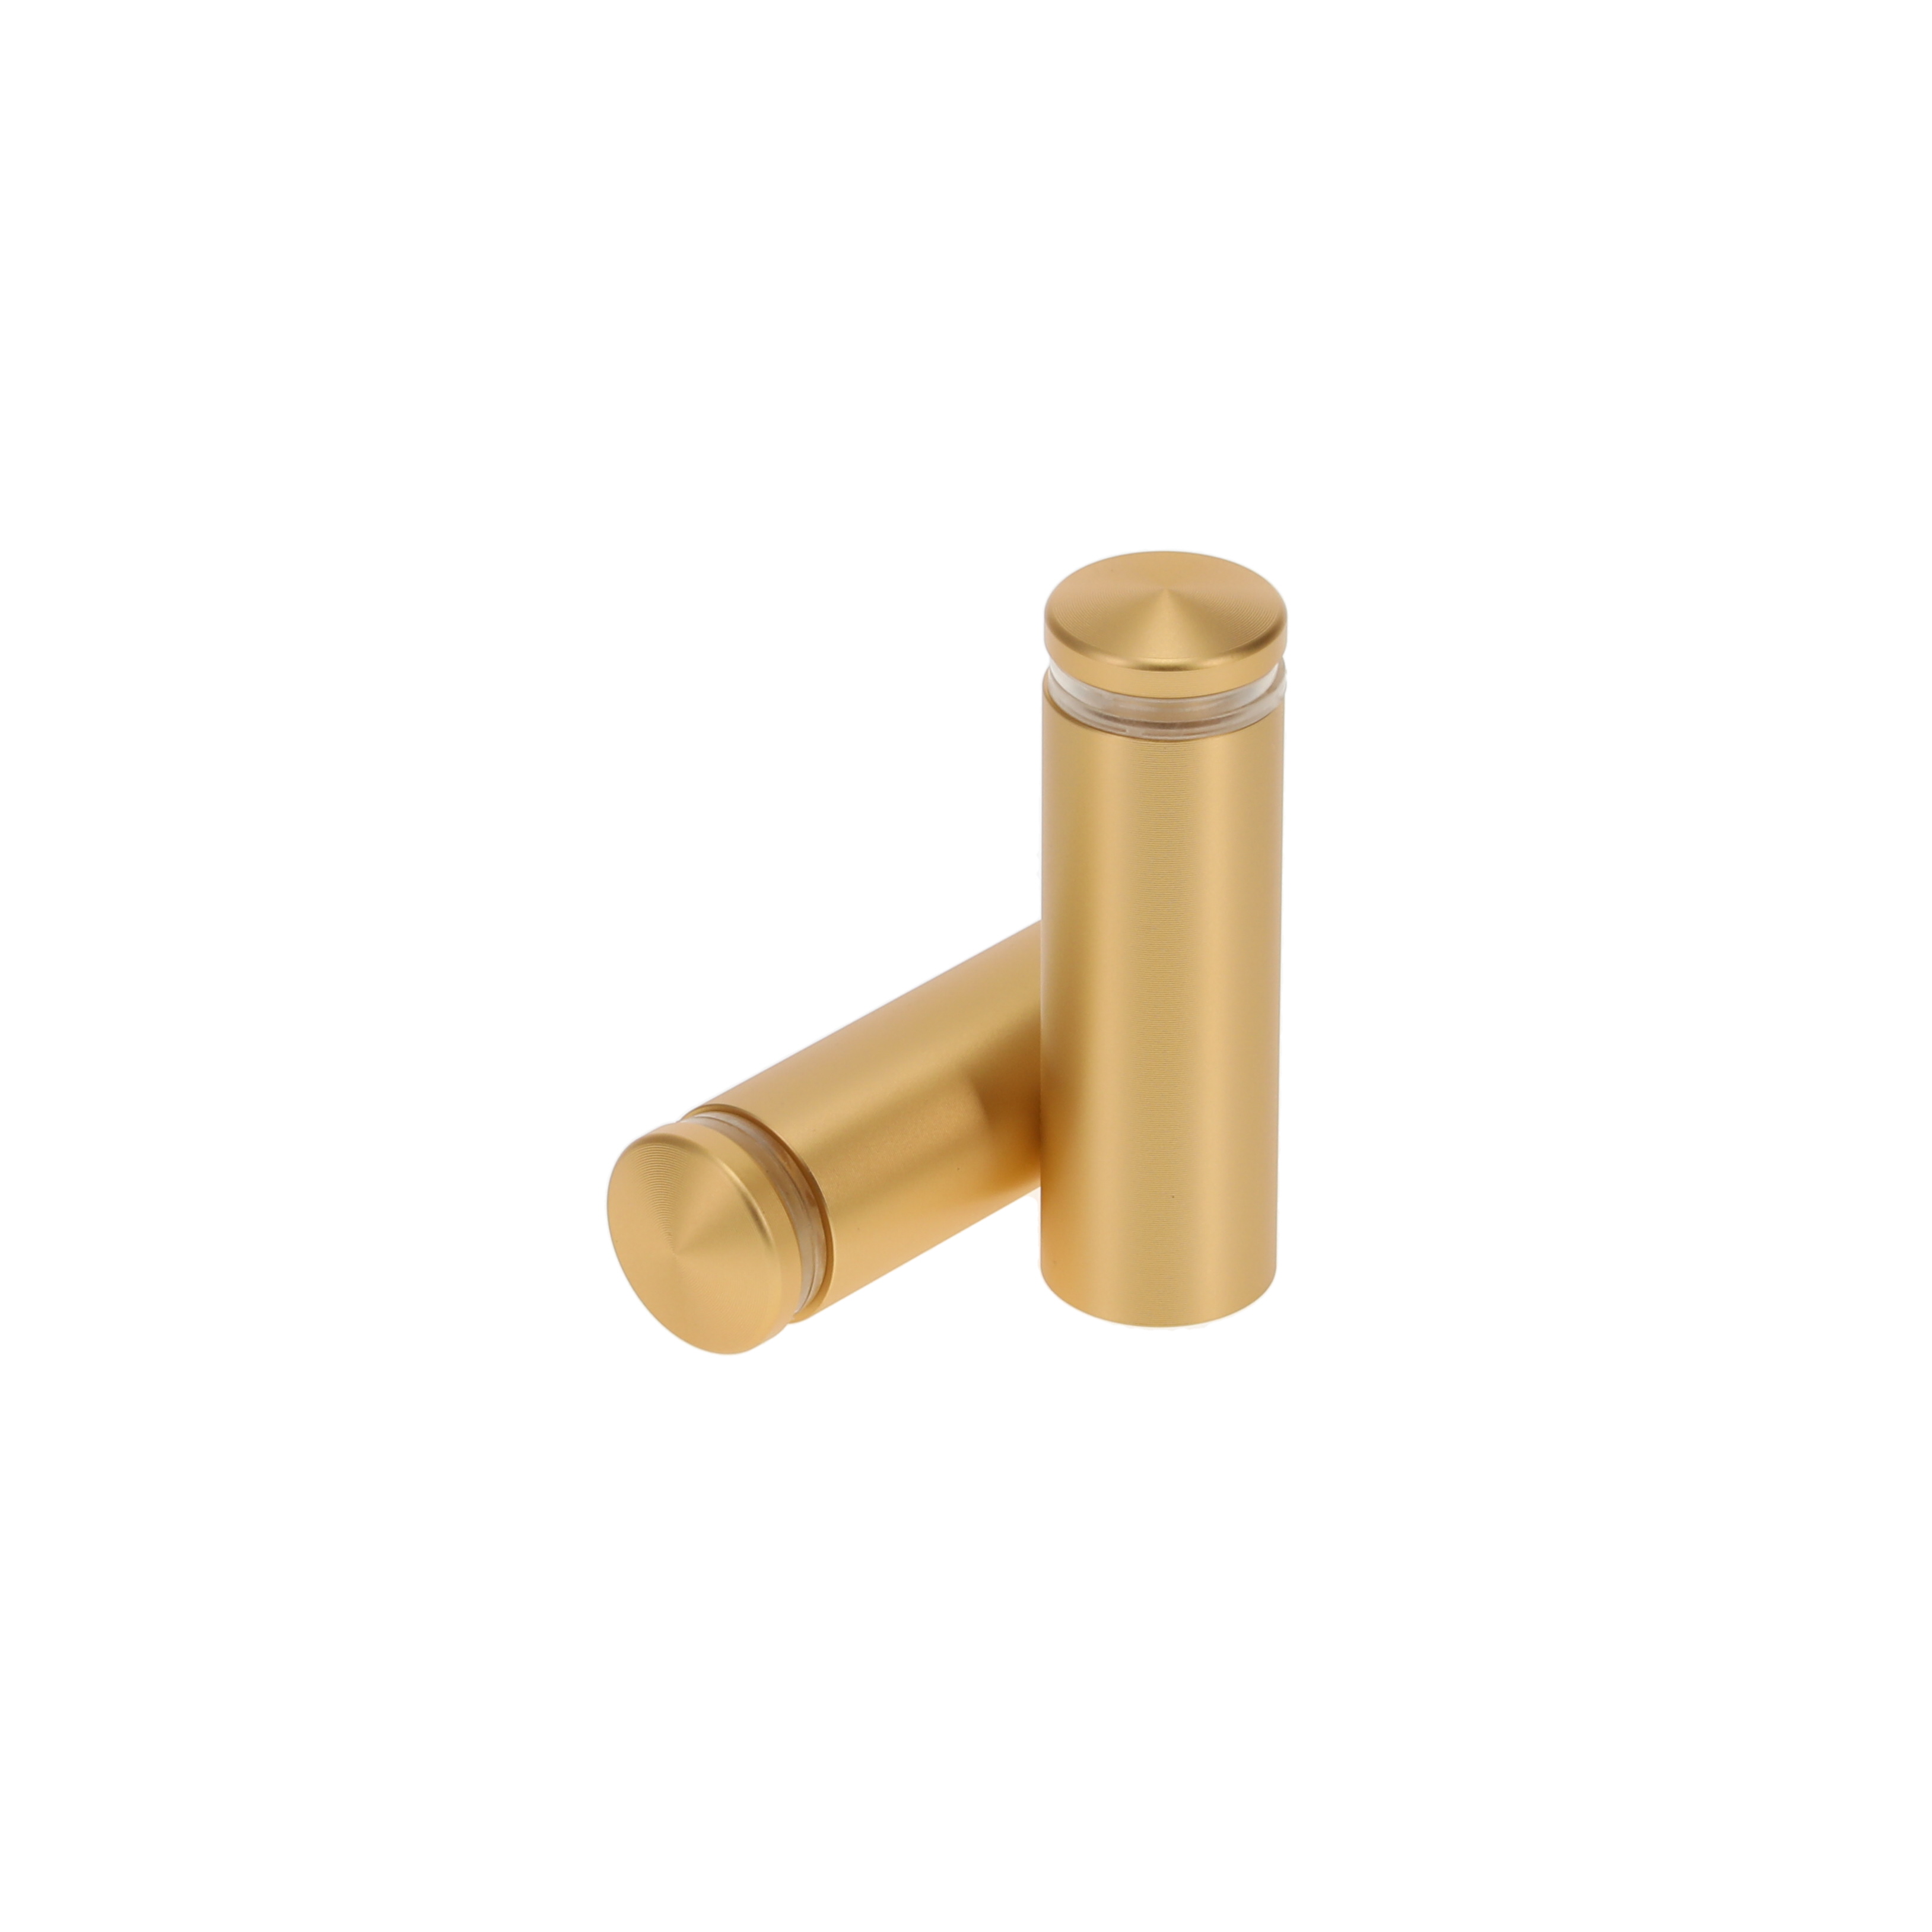 5/8'' Diameter X 1-3/4'' Barrel Length, Aluminum Rounded Head Standoffs, Matte Champagne Anodized Finish Easy Fasten Standoff (For Inside / Outside use) [Required Material Hole Size: 7/16'']